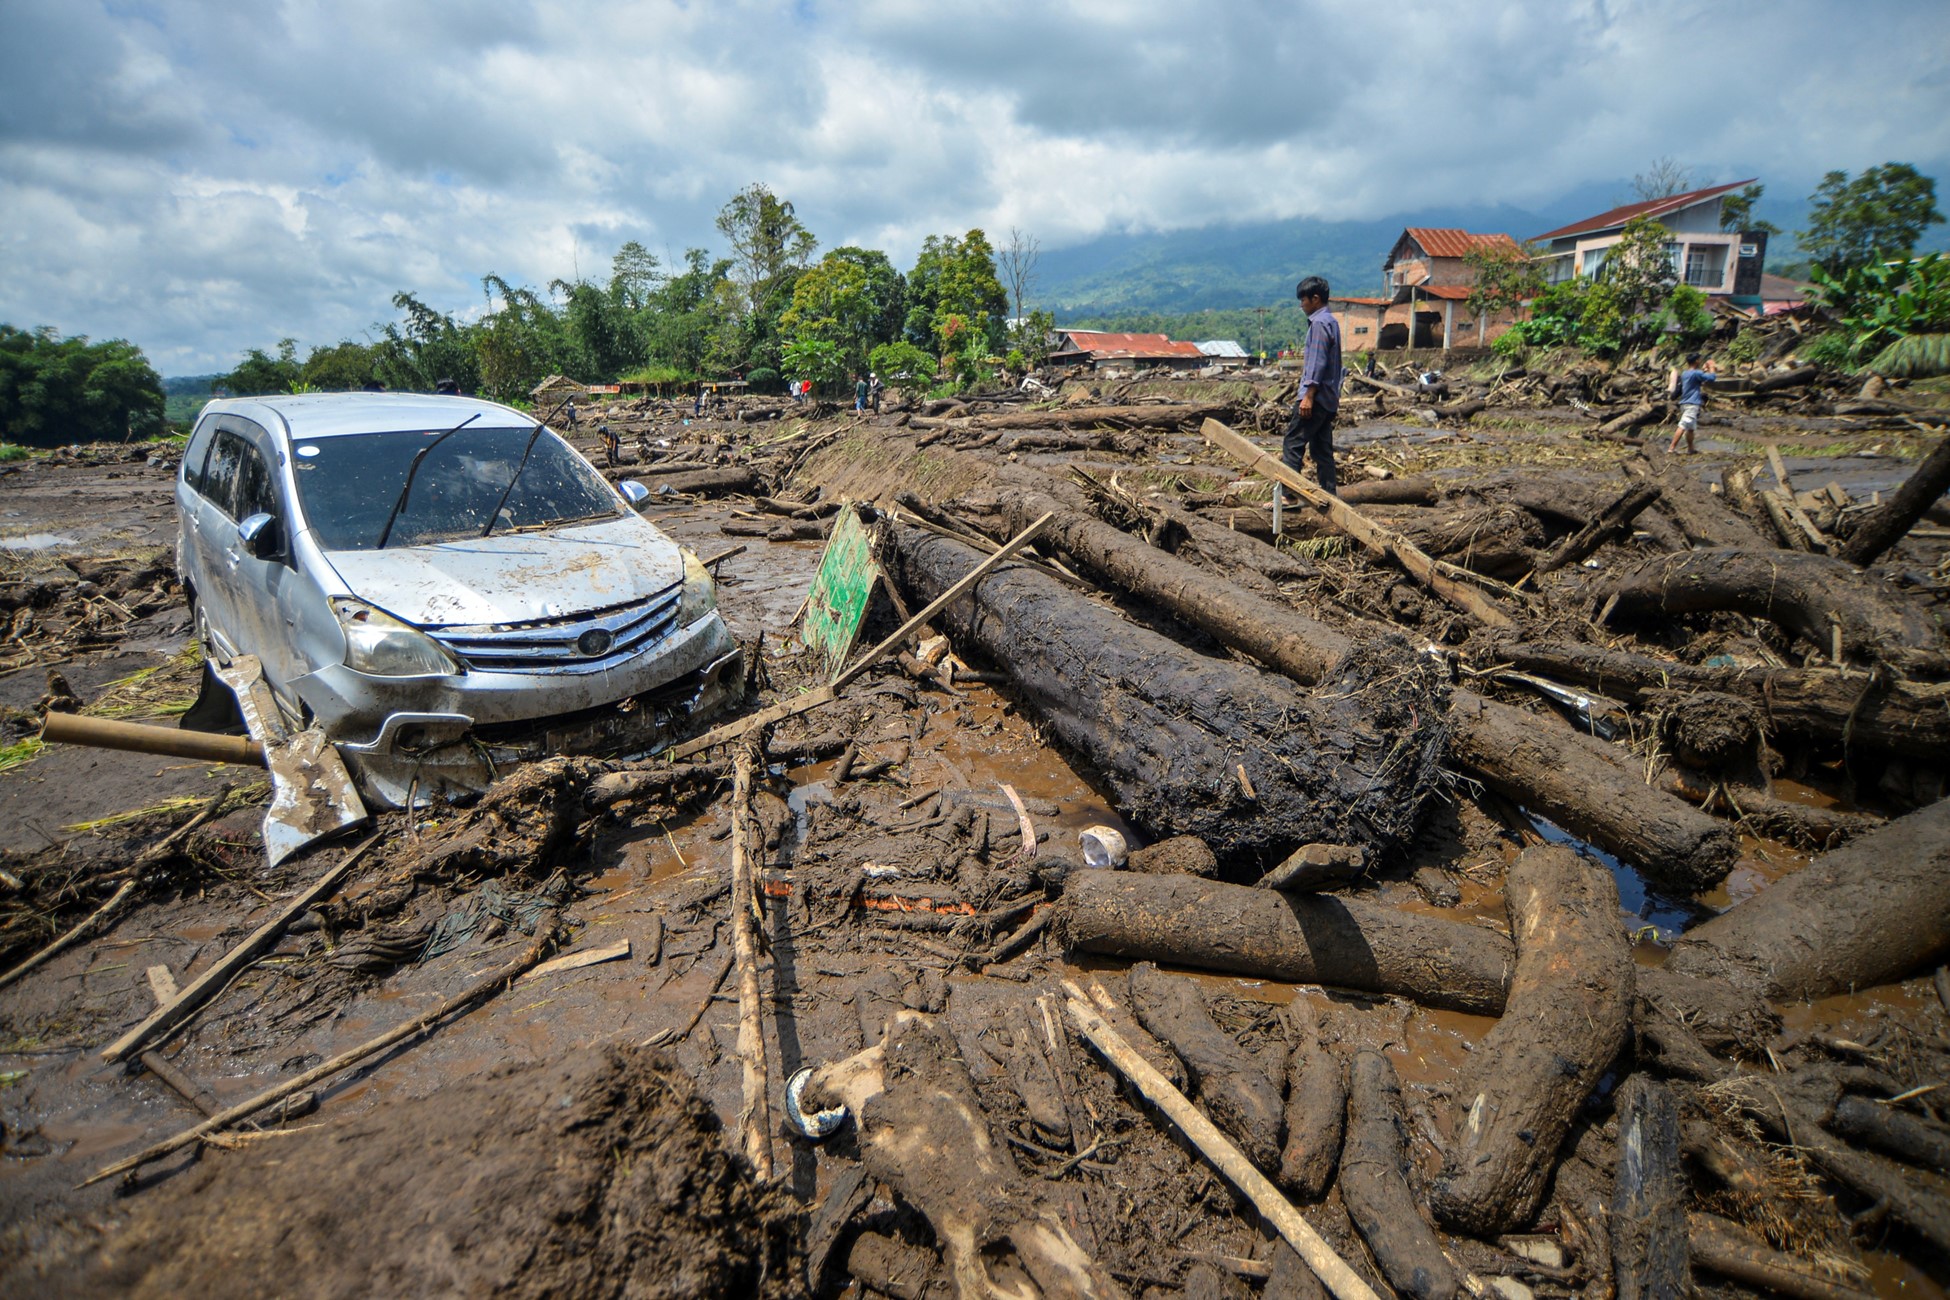 A man stands near a damaged car in an area area affected by heavy rain brought flash floods and landslides in Agam, West Sumatra province, Indonesia, May 12, 2024.